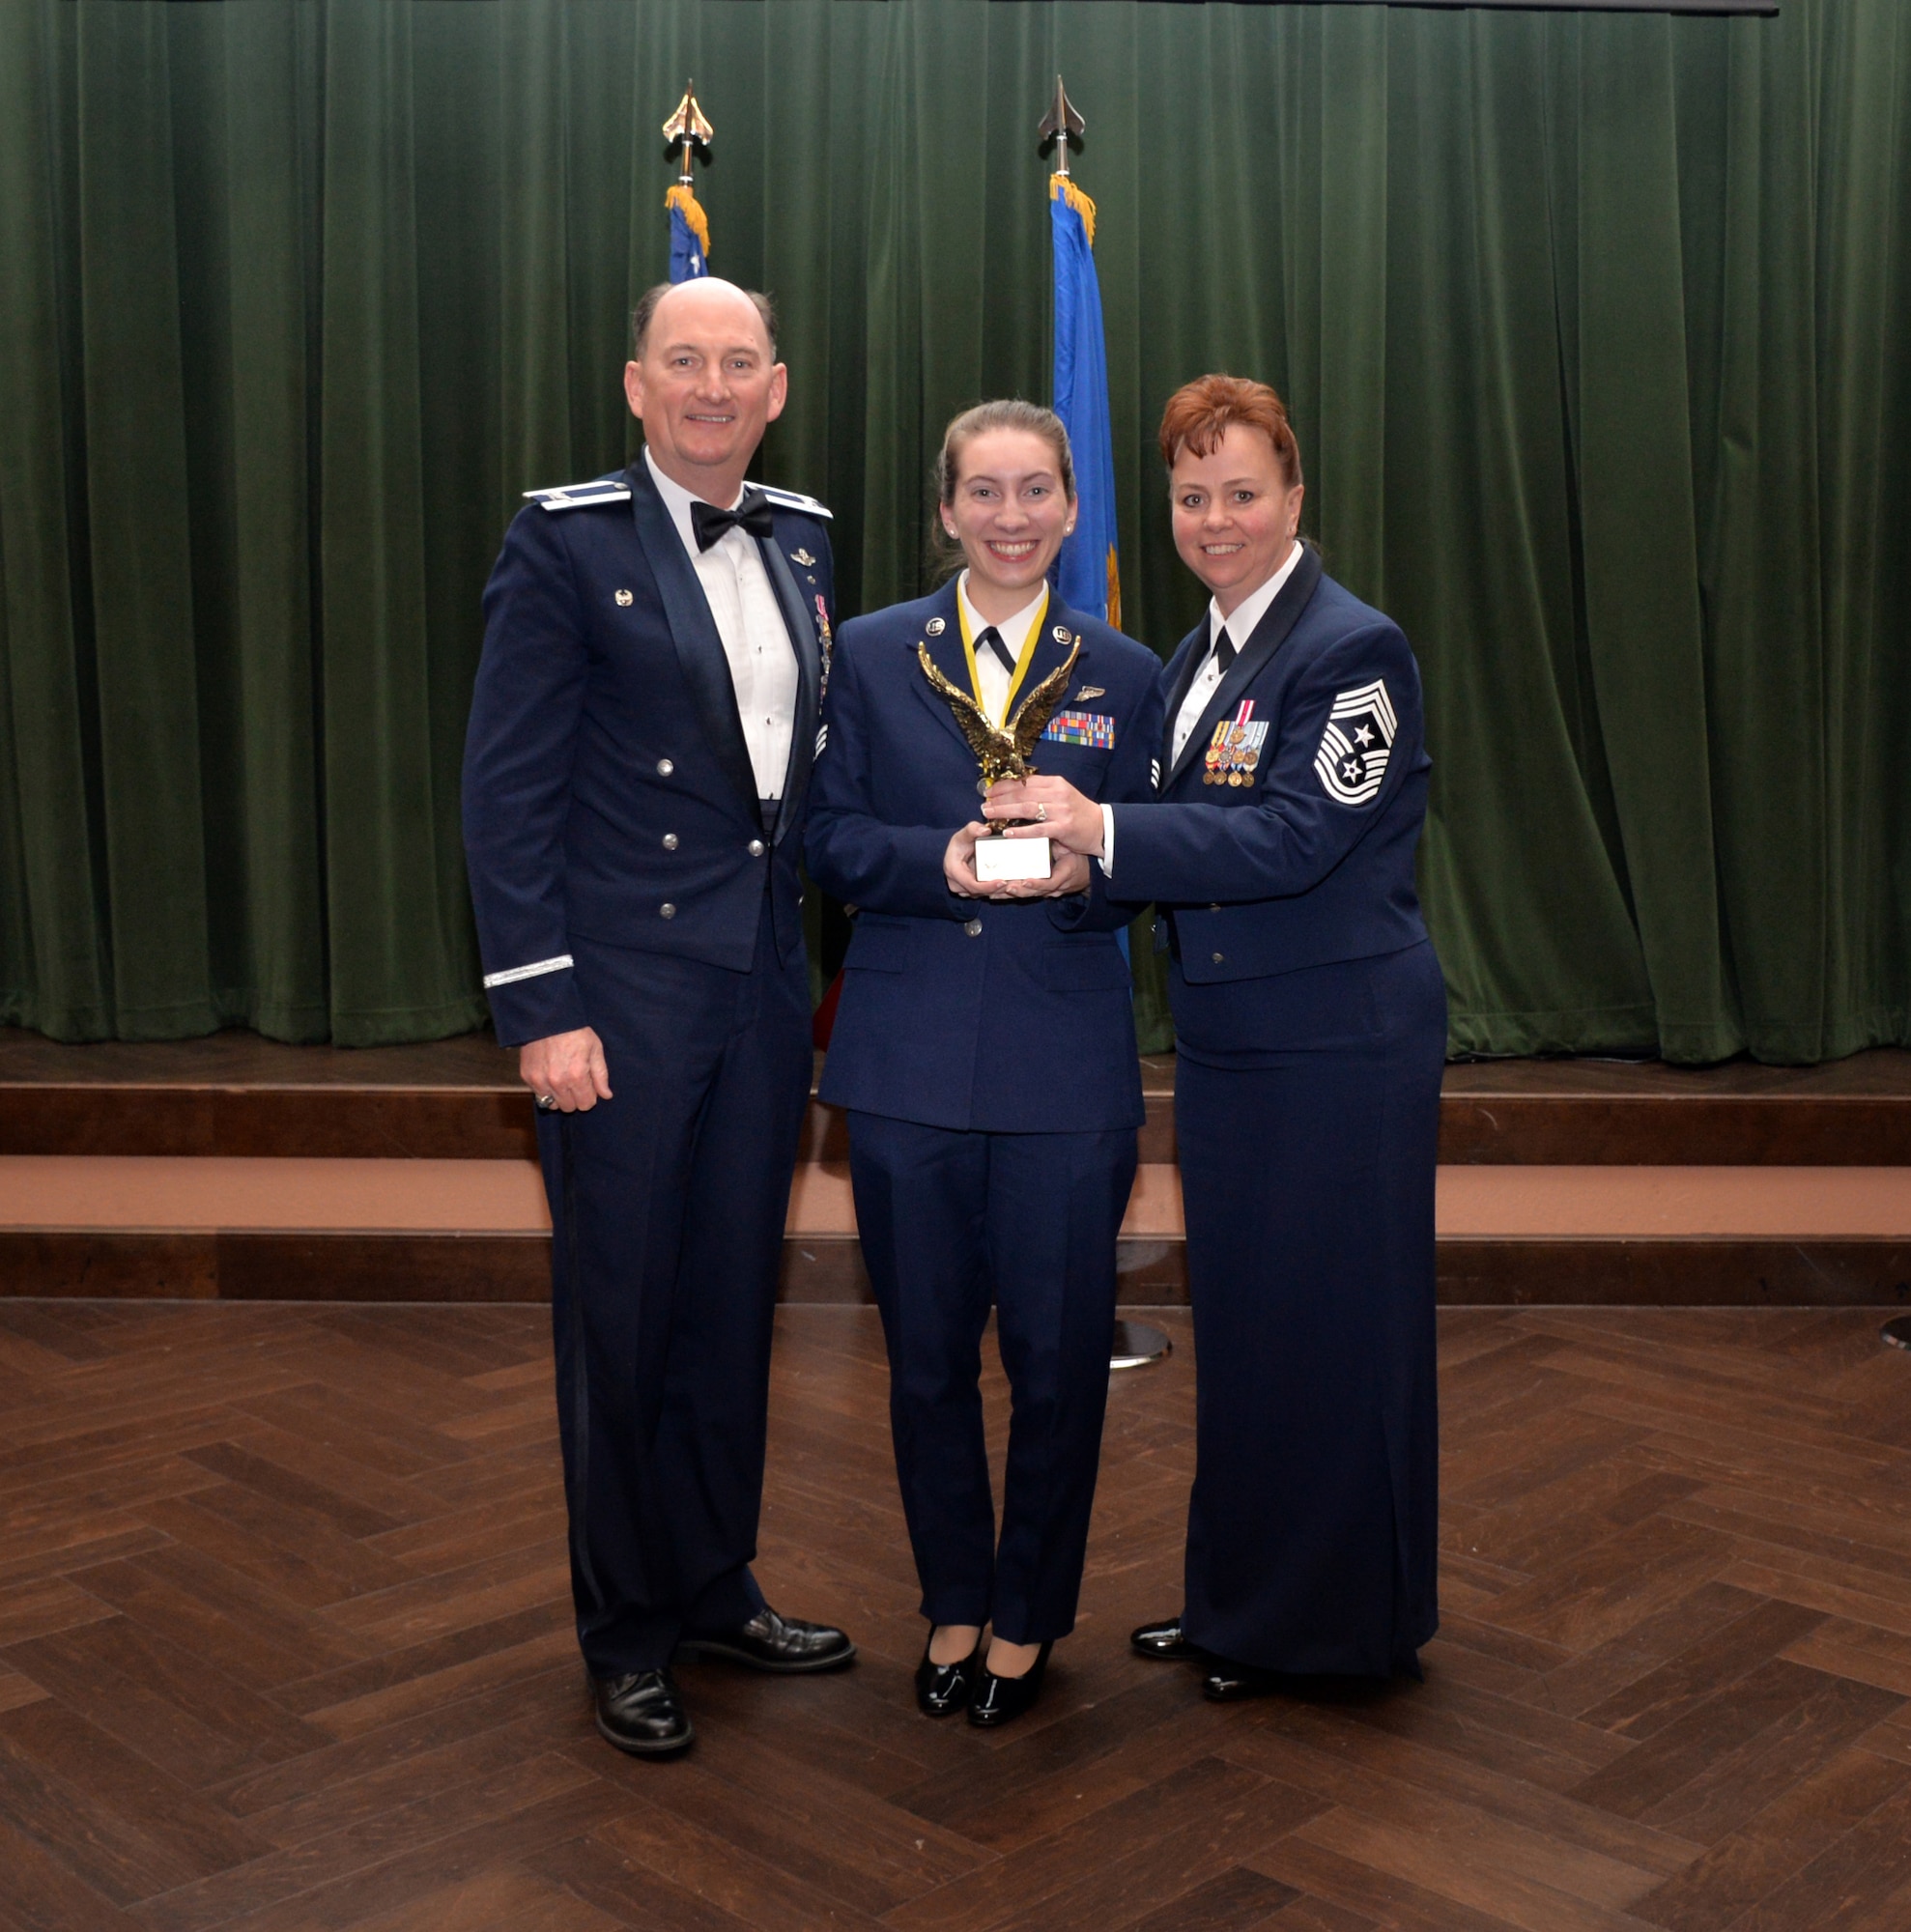 Col. Thomas K. Smith, 433rd Airlift Wing commander, and 433rd AW Command Chief Master Sgt. Shana C. Cullum, award Senior Airman Kryssianna Paula, 68th Airlift Squadron, as the Airman of the Year at the 433rd AW annual awards banquet at Joint Base San Antonio-Lackland, Texas Feb. 9, 2019.